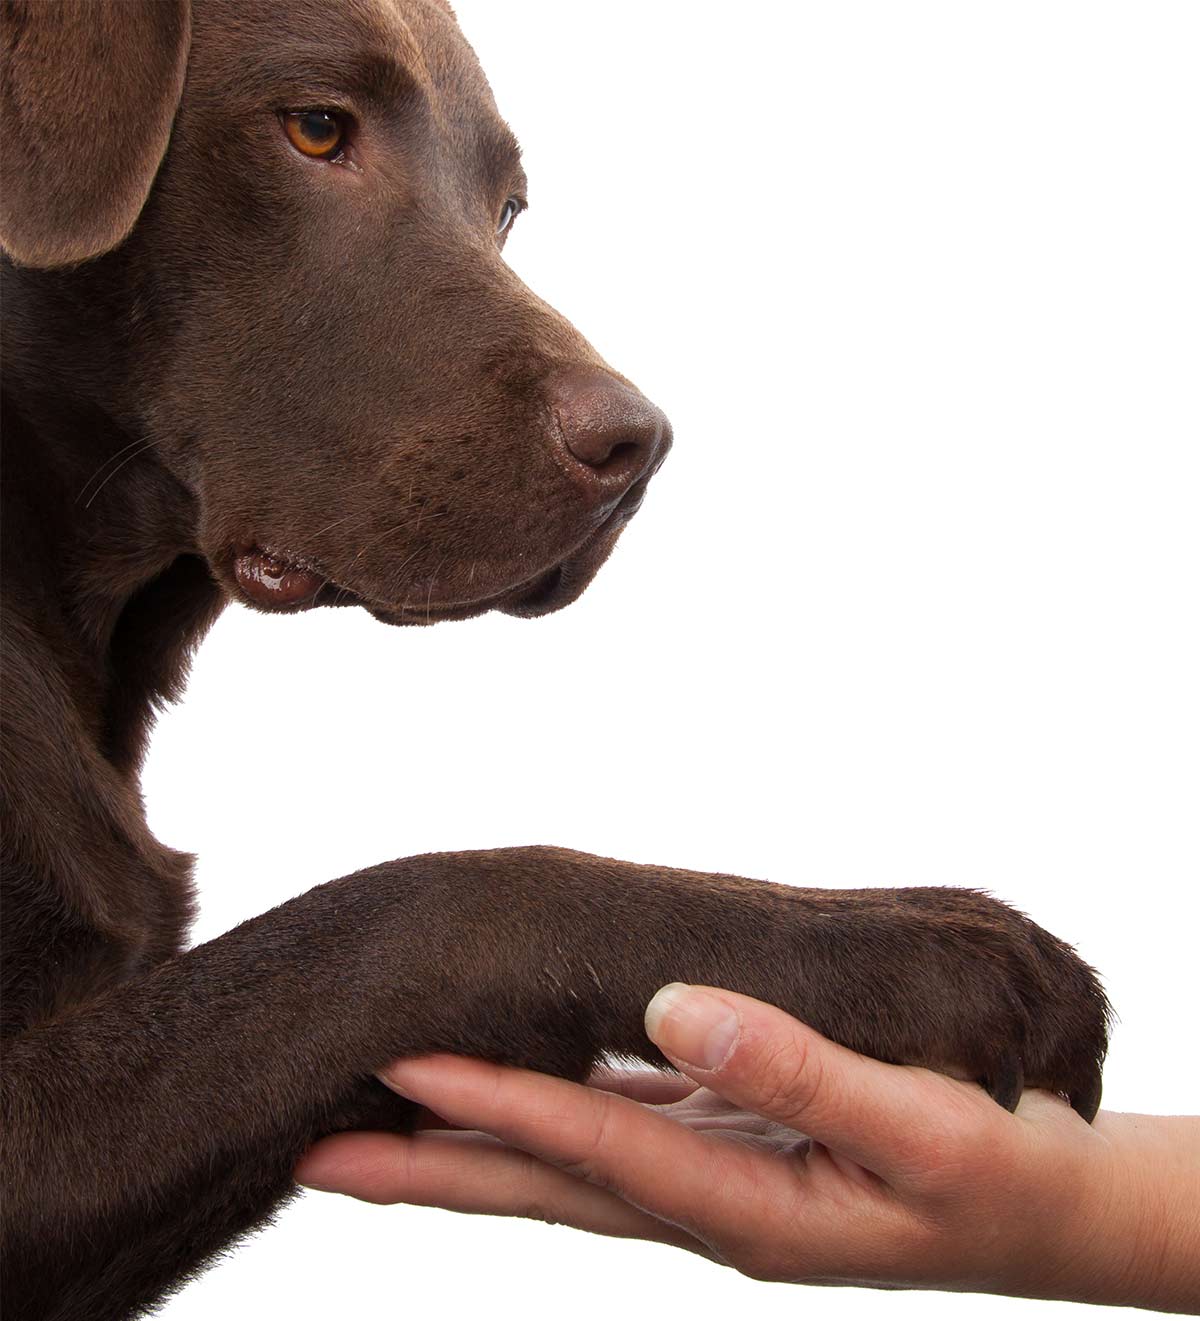 How To Stop A Dog's Nail From Bleeding Safely and Quickly